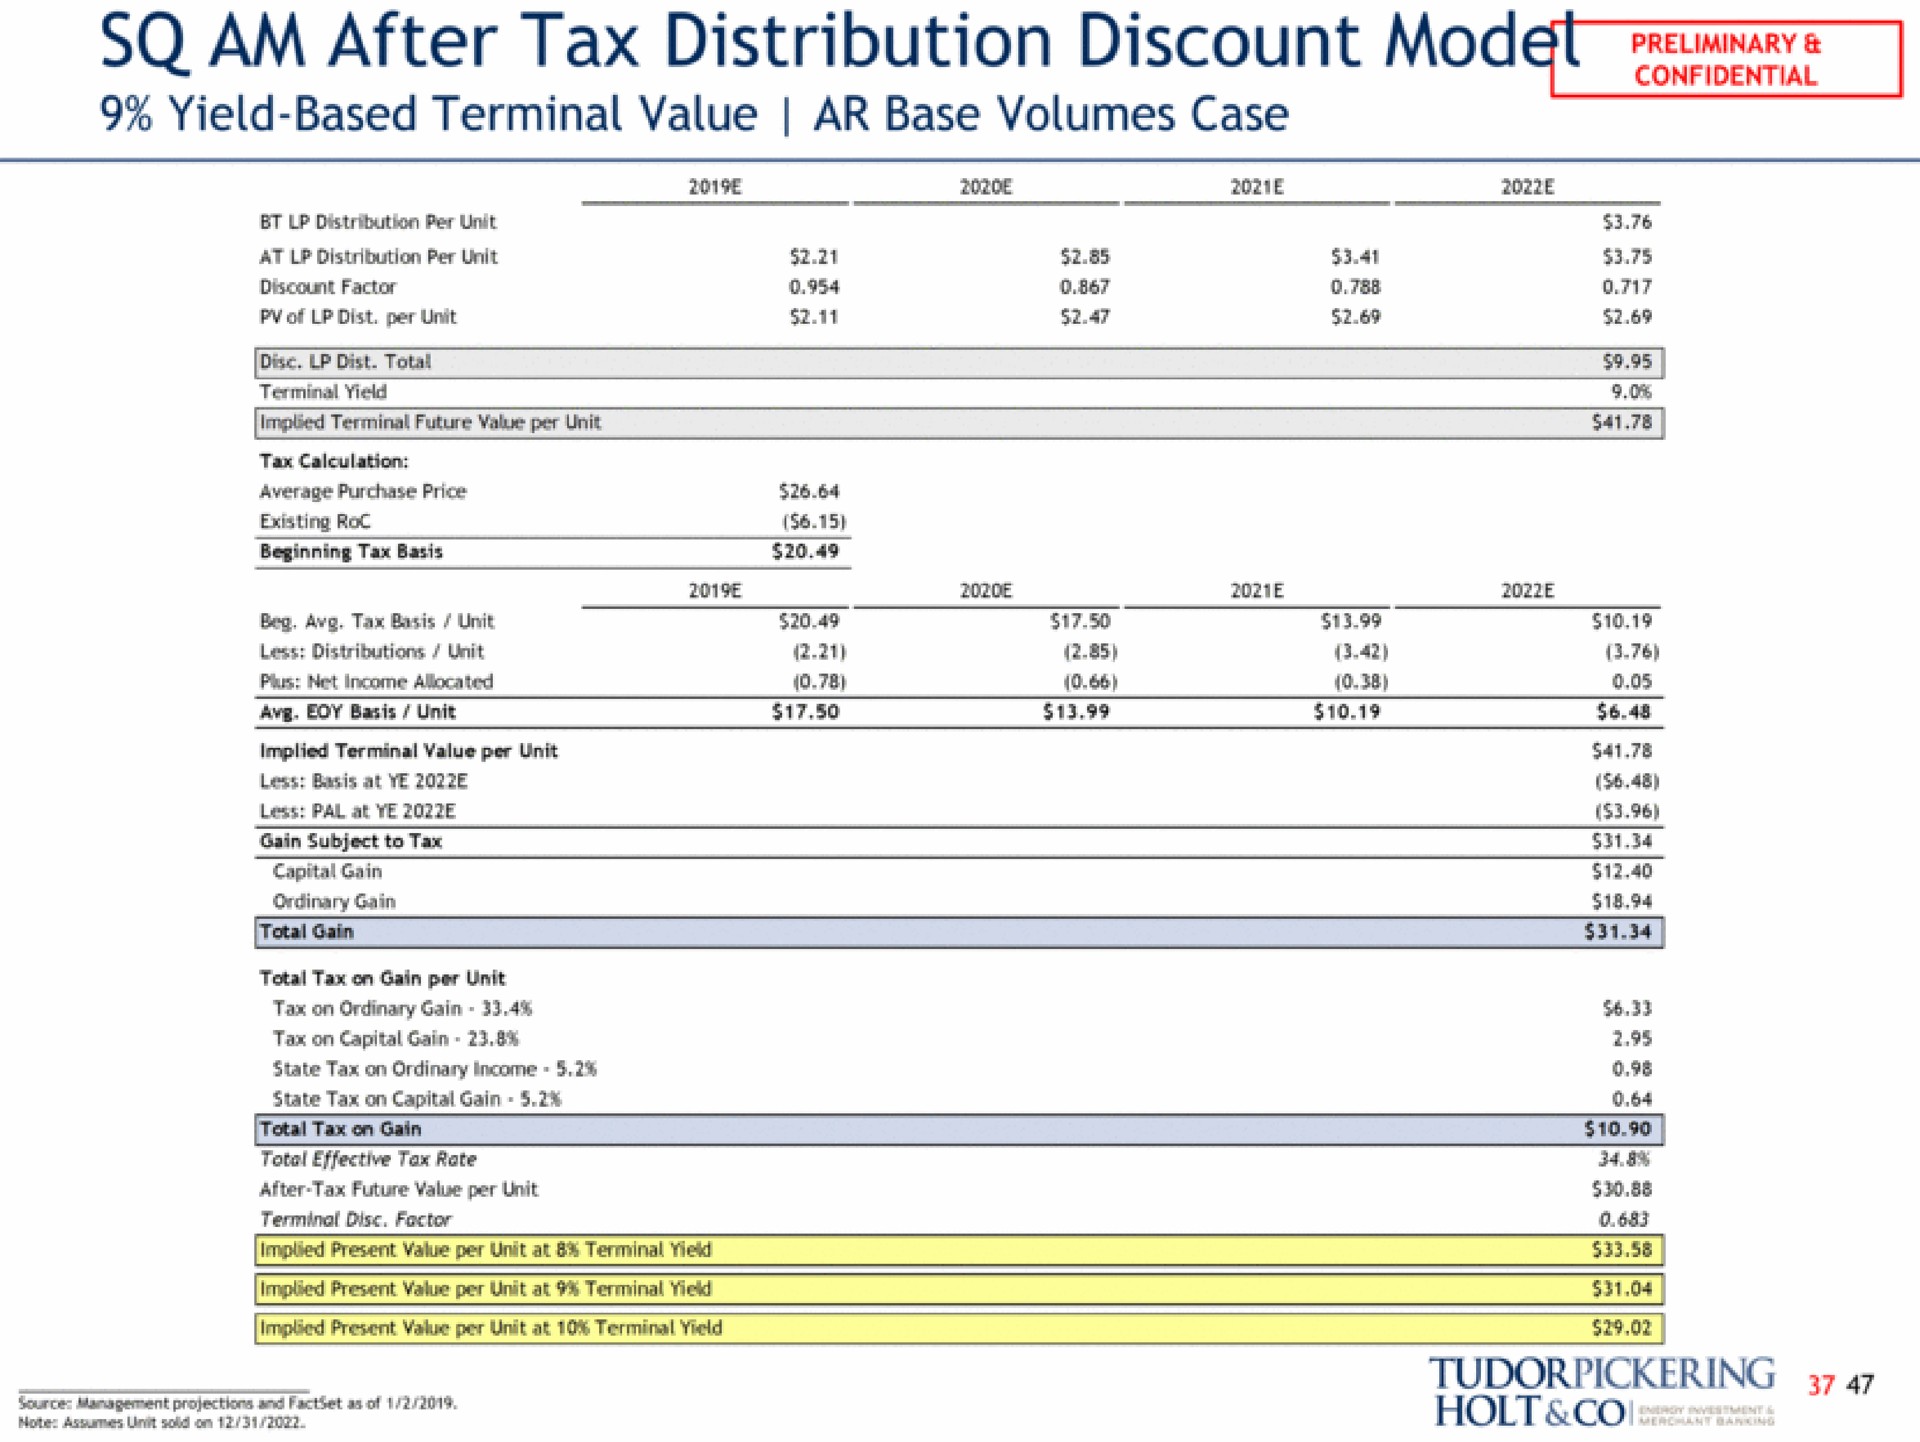 am after tax distribution discount mode yield based terminal value base volumes case holt | Tudor, Pickering, Holt & Co